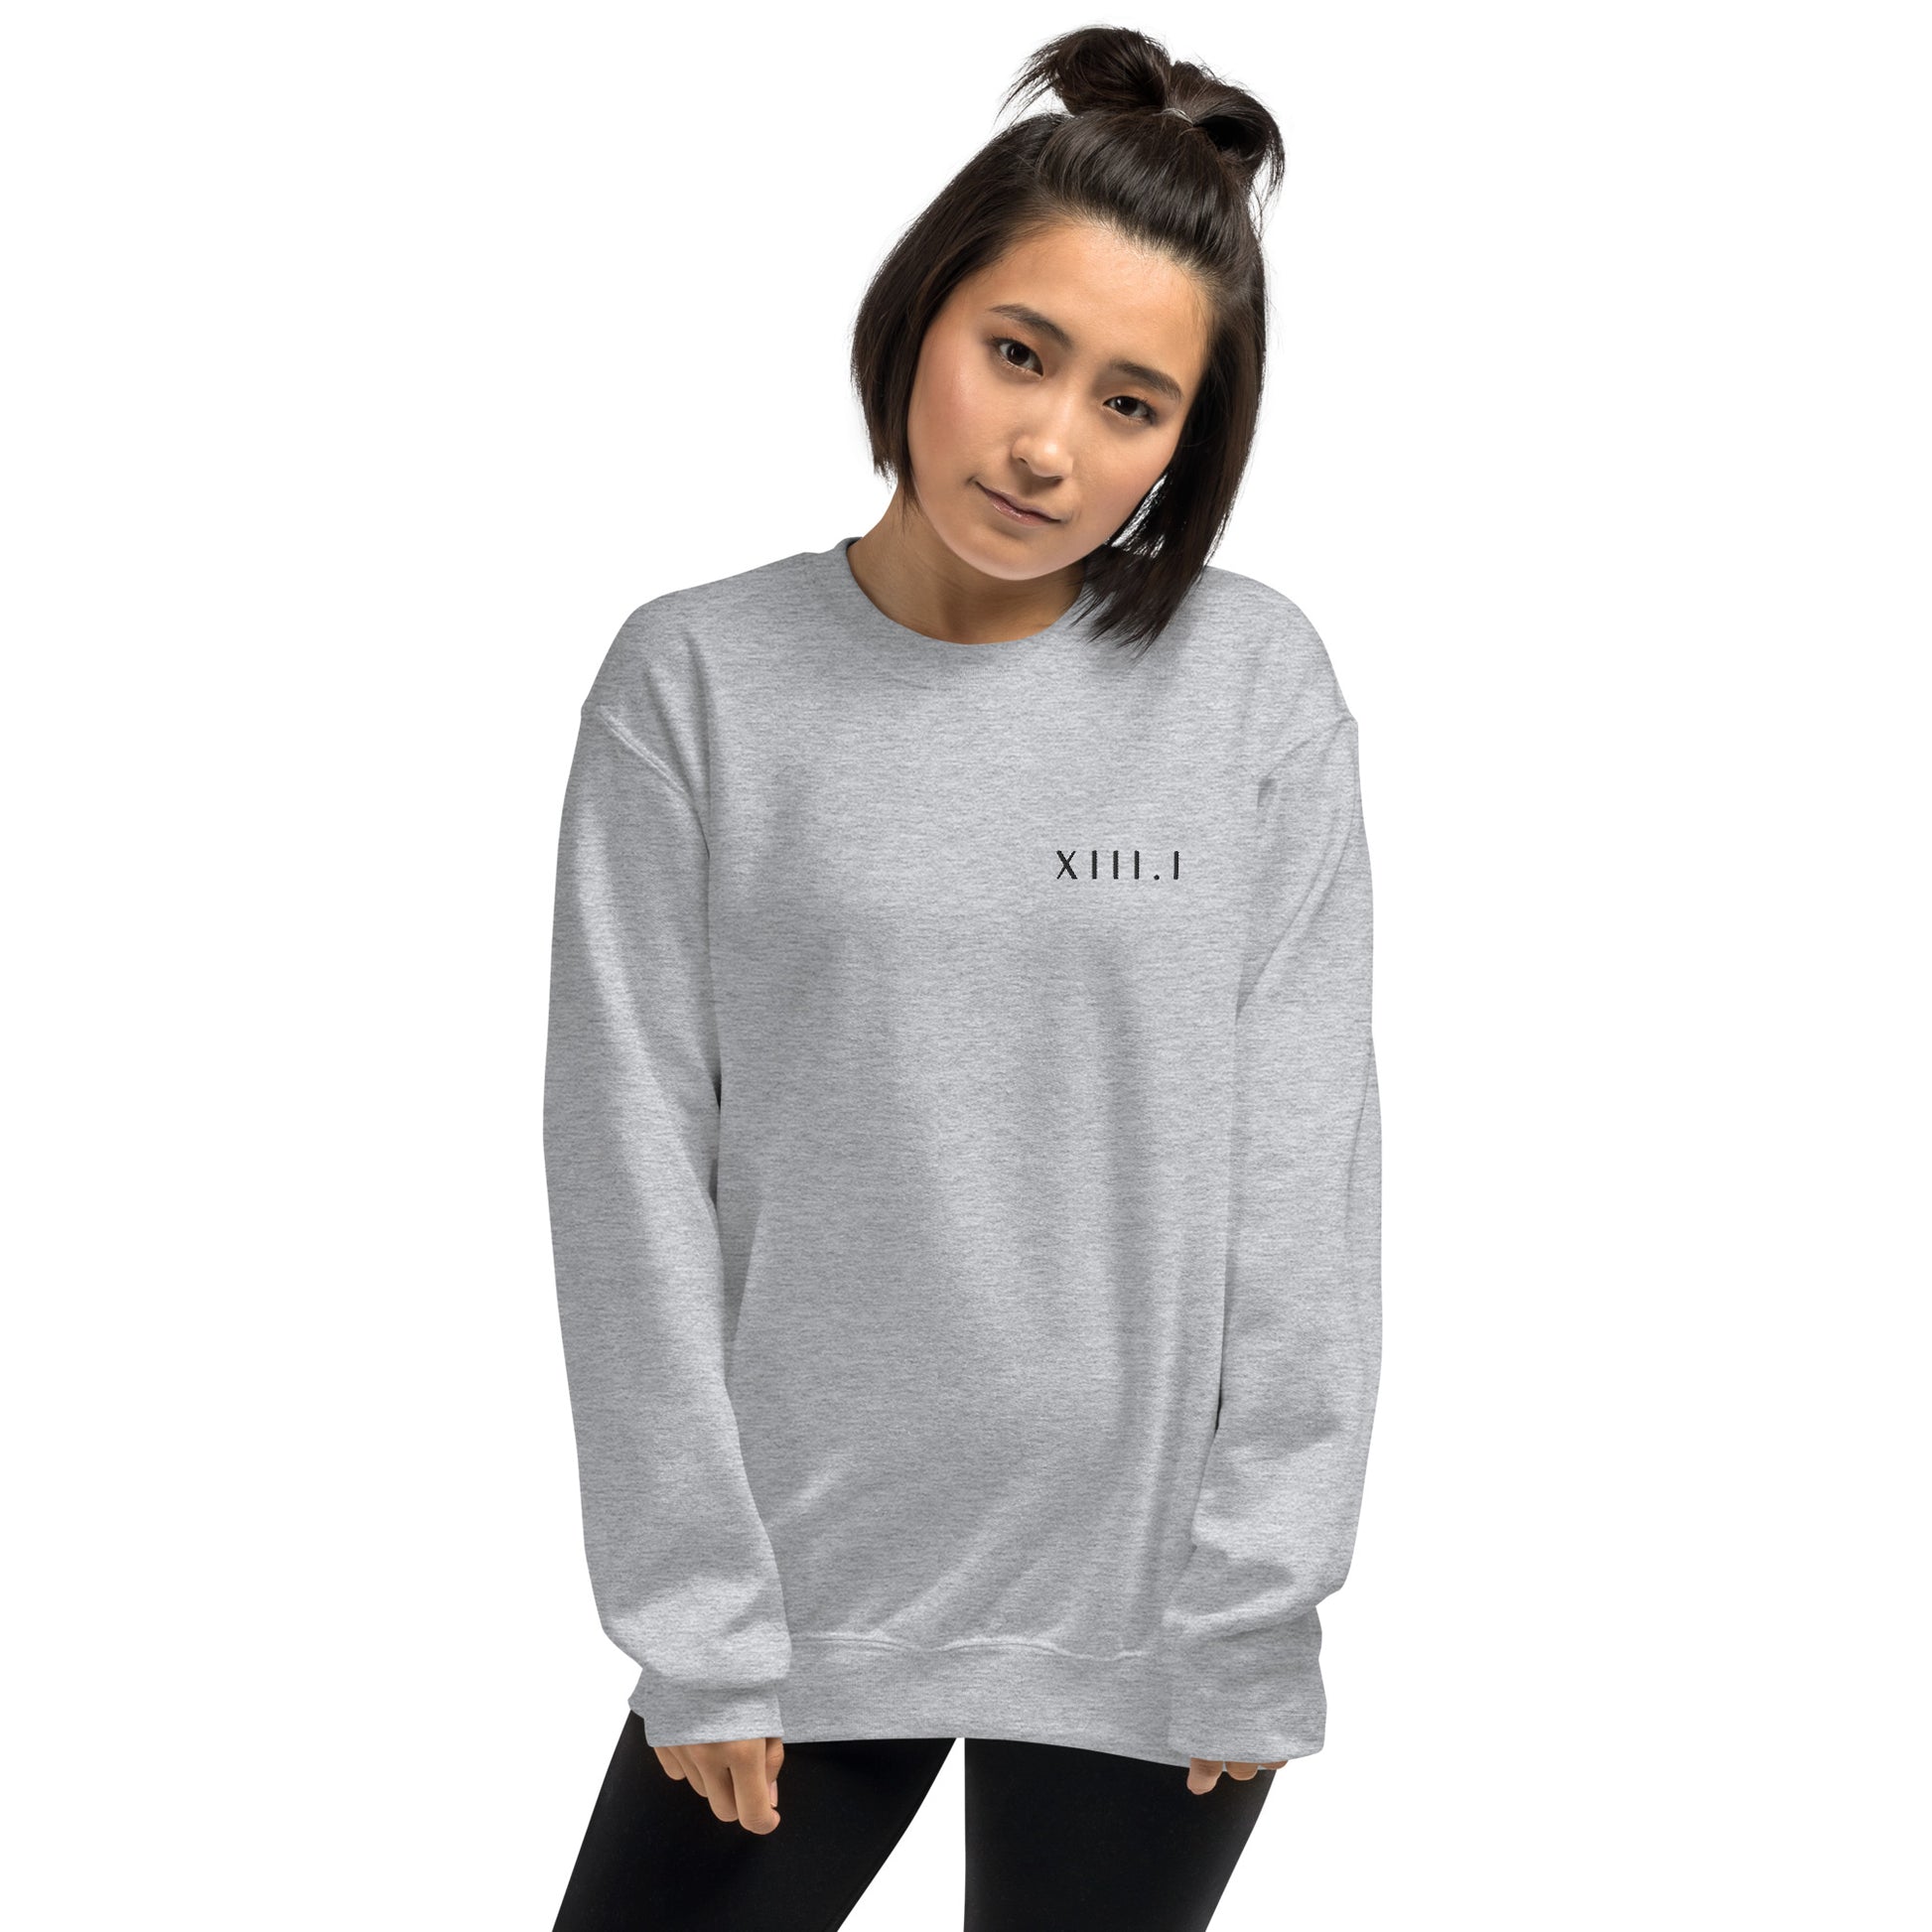 woman wearing a light grey unisex sweatshirt with XIII.I 13.1 half marathon in roman numerals embroidered in black writing